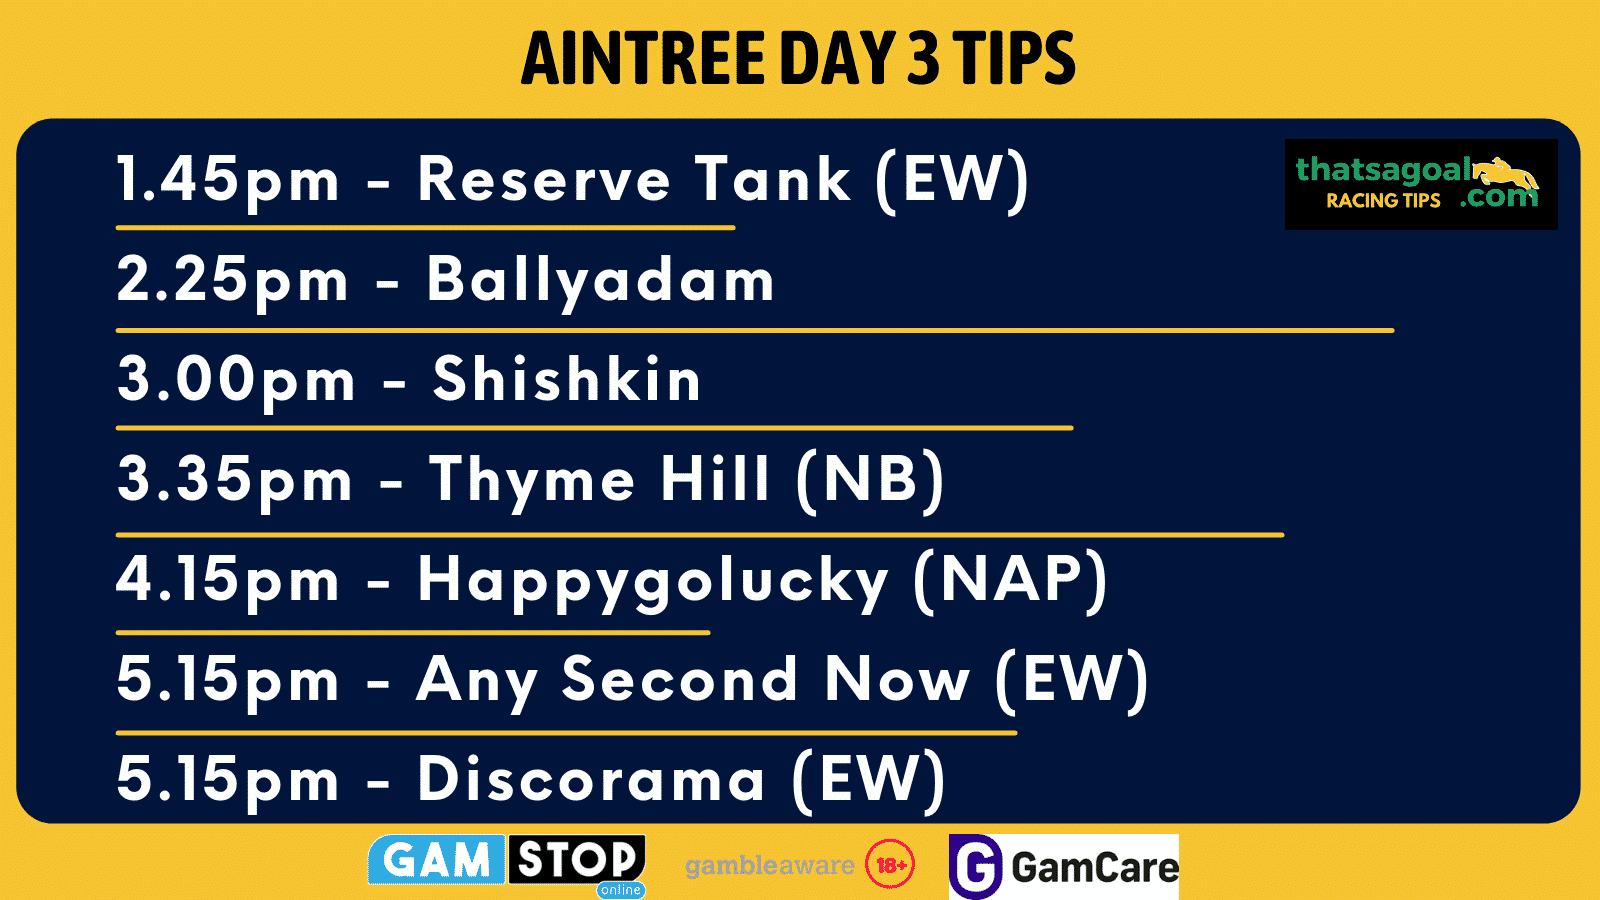 Aintree day 3 tips